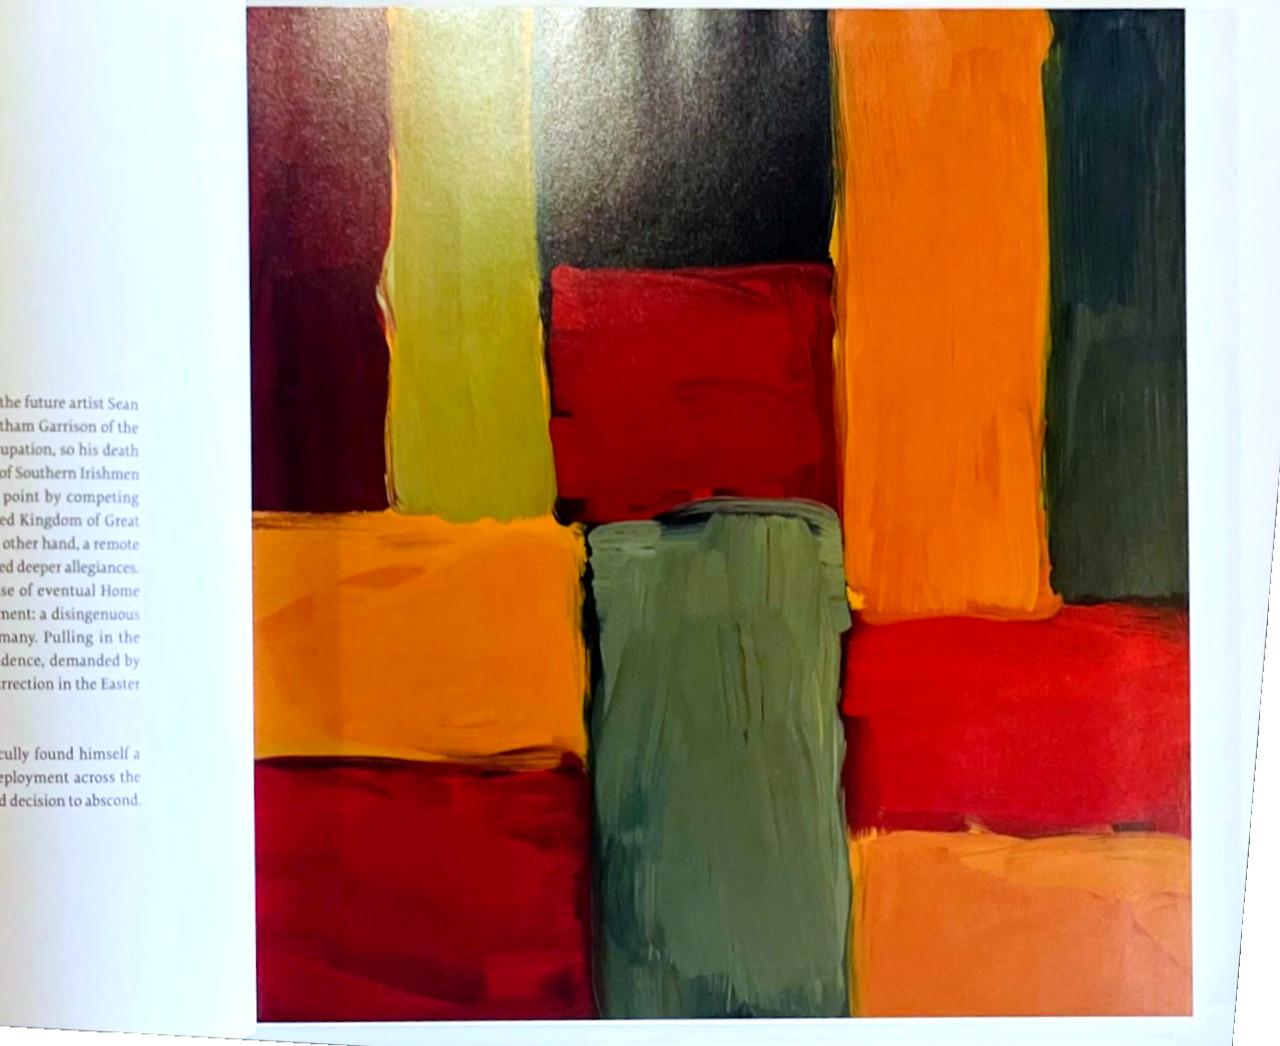 Different Places, Hardback monograph (Hand signed and inscribed by Sean Scully) For Sale 6